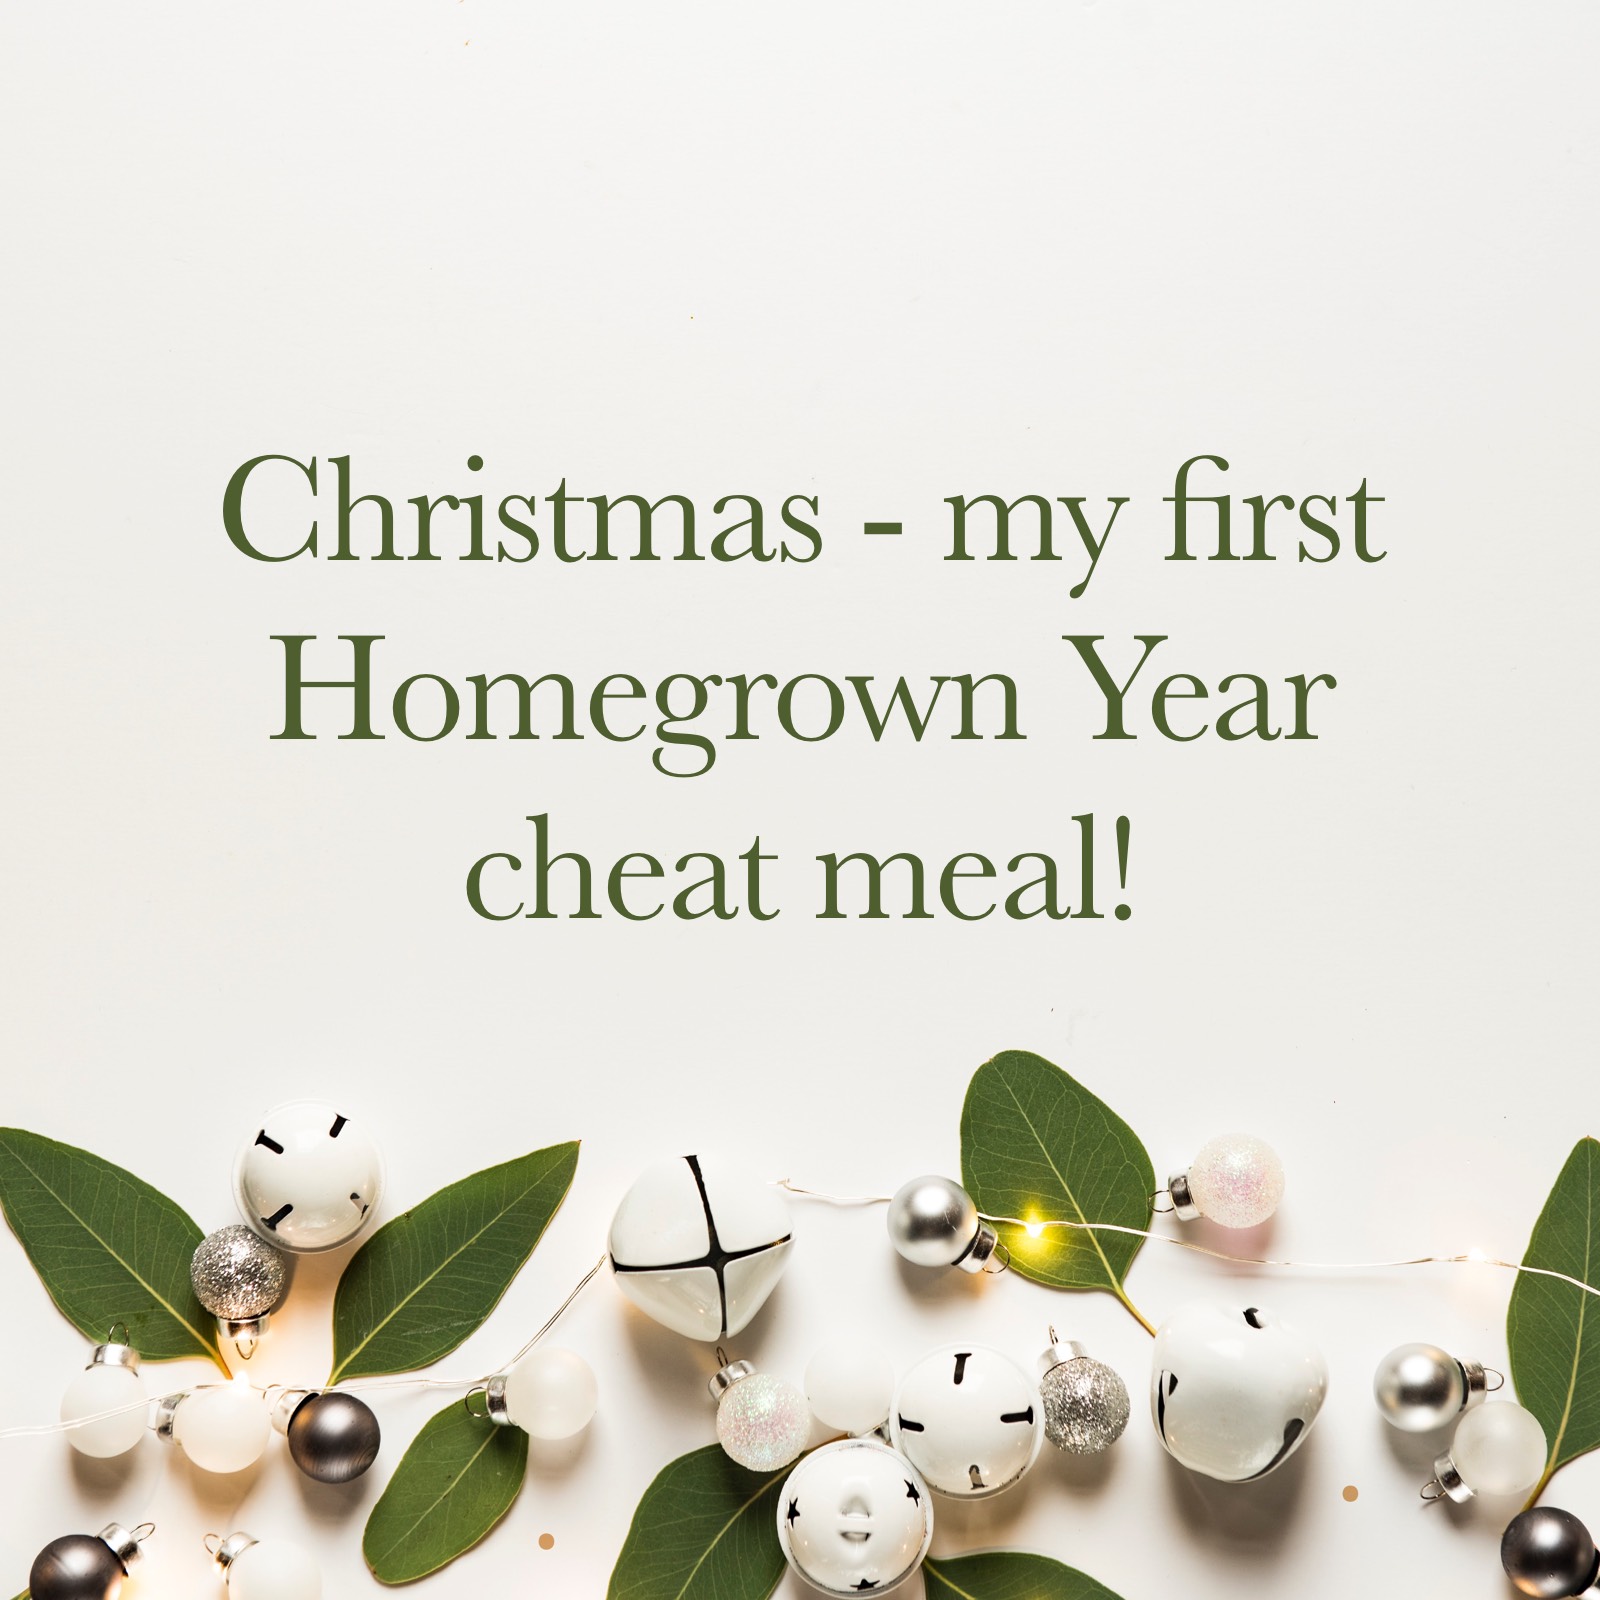 Christmas – my first cheat meal